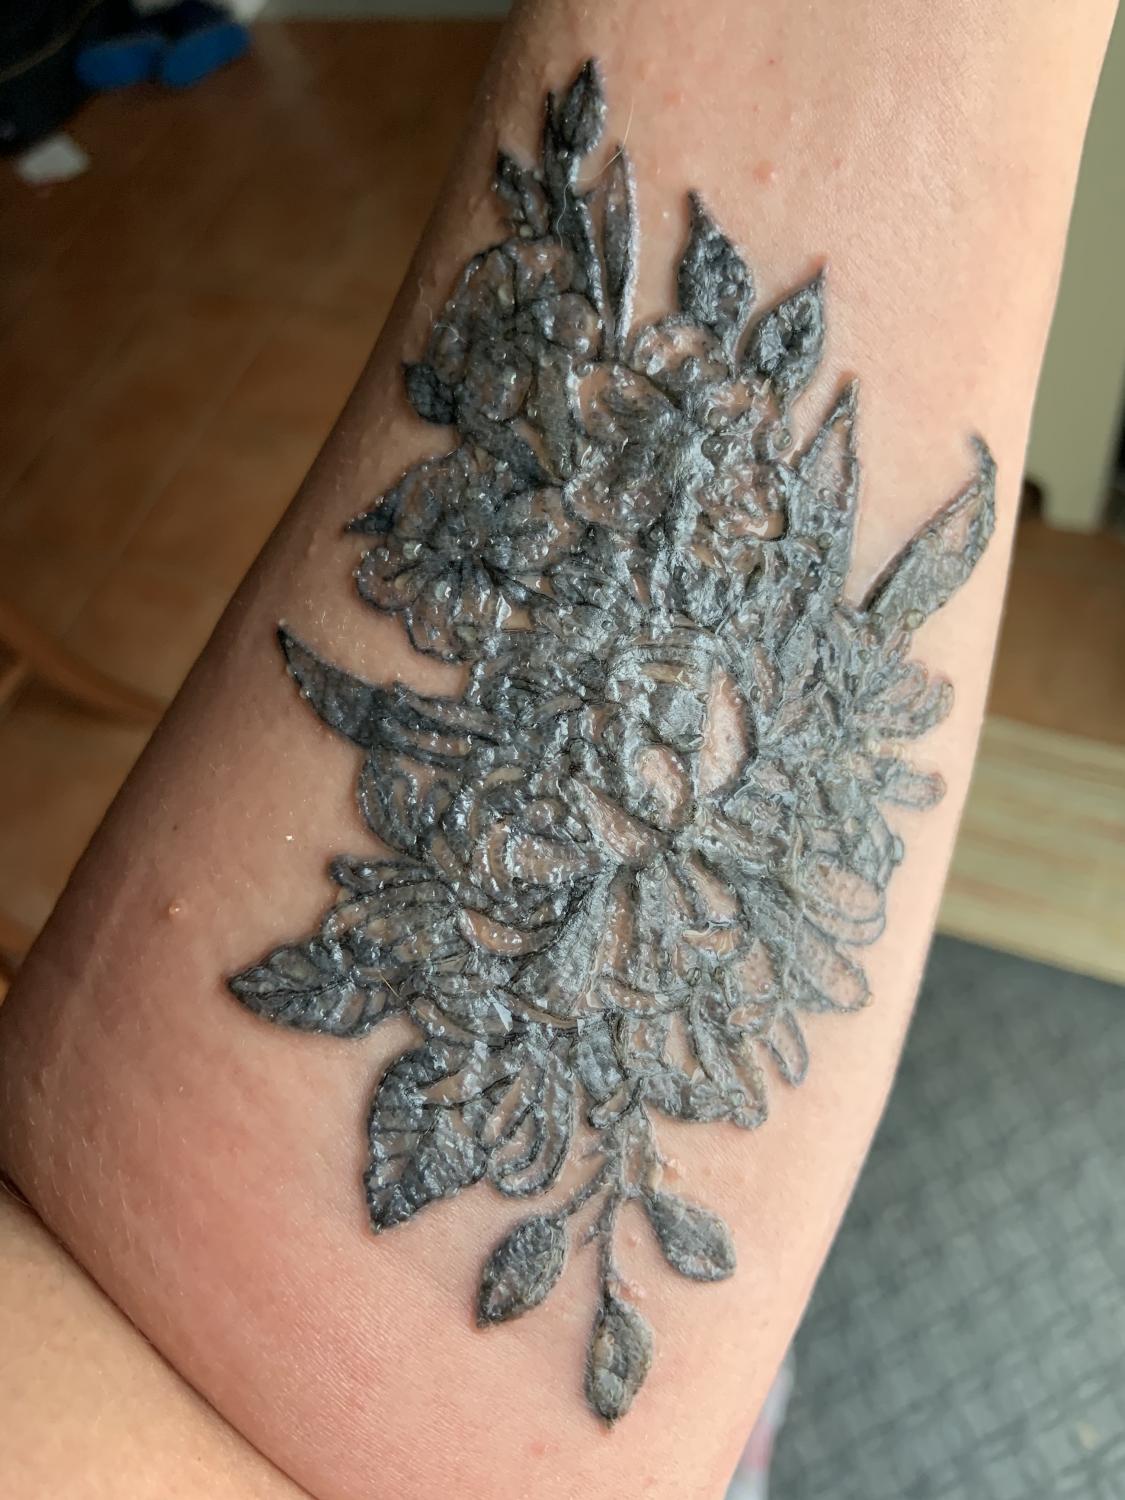 Plasma Build Up And The Tattoo Healing Process Explained